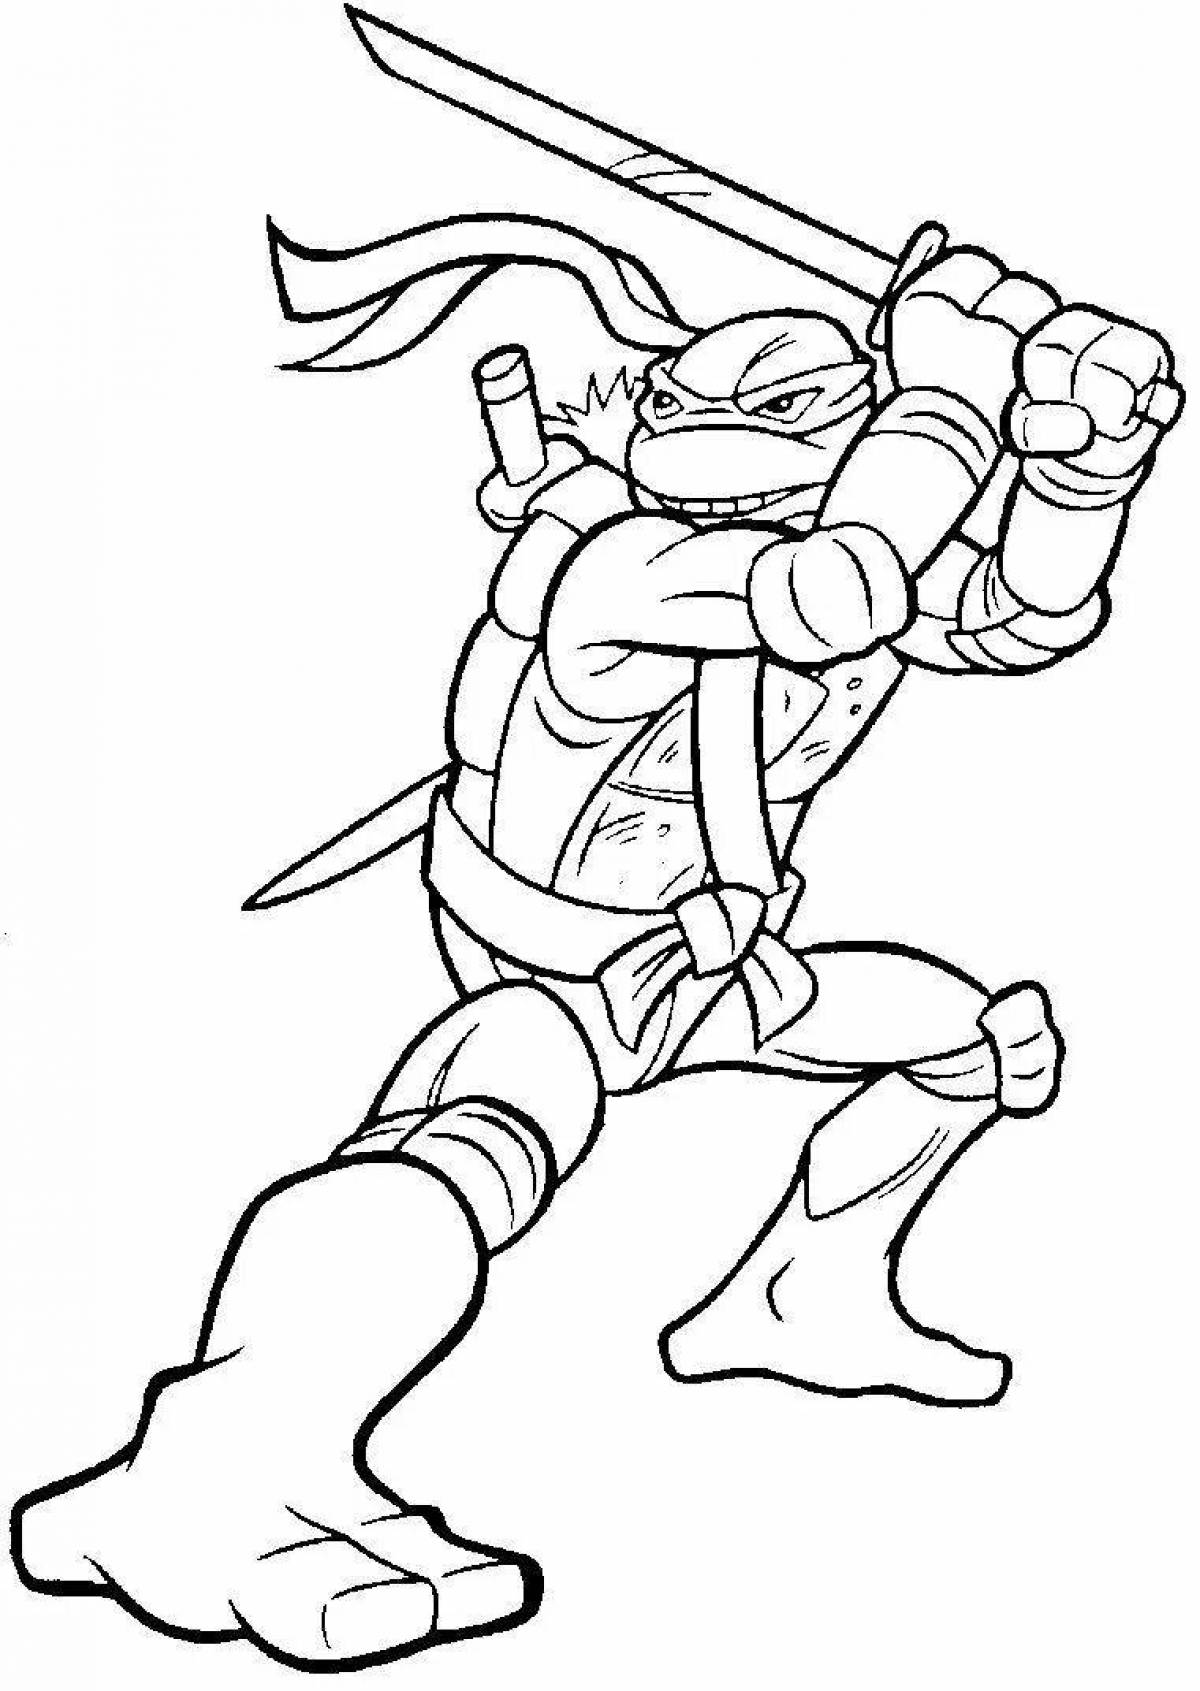 Colorful Teenage Mutant Ninja Turtles coloring pages for kids